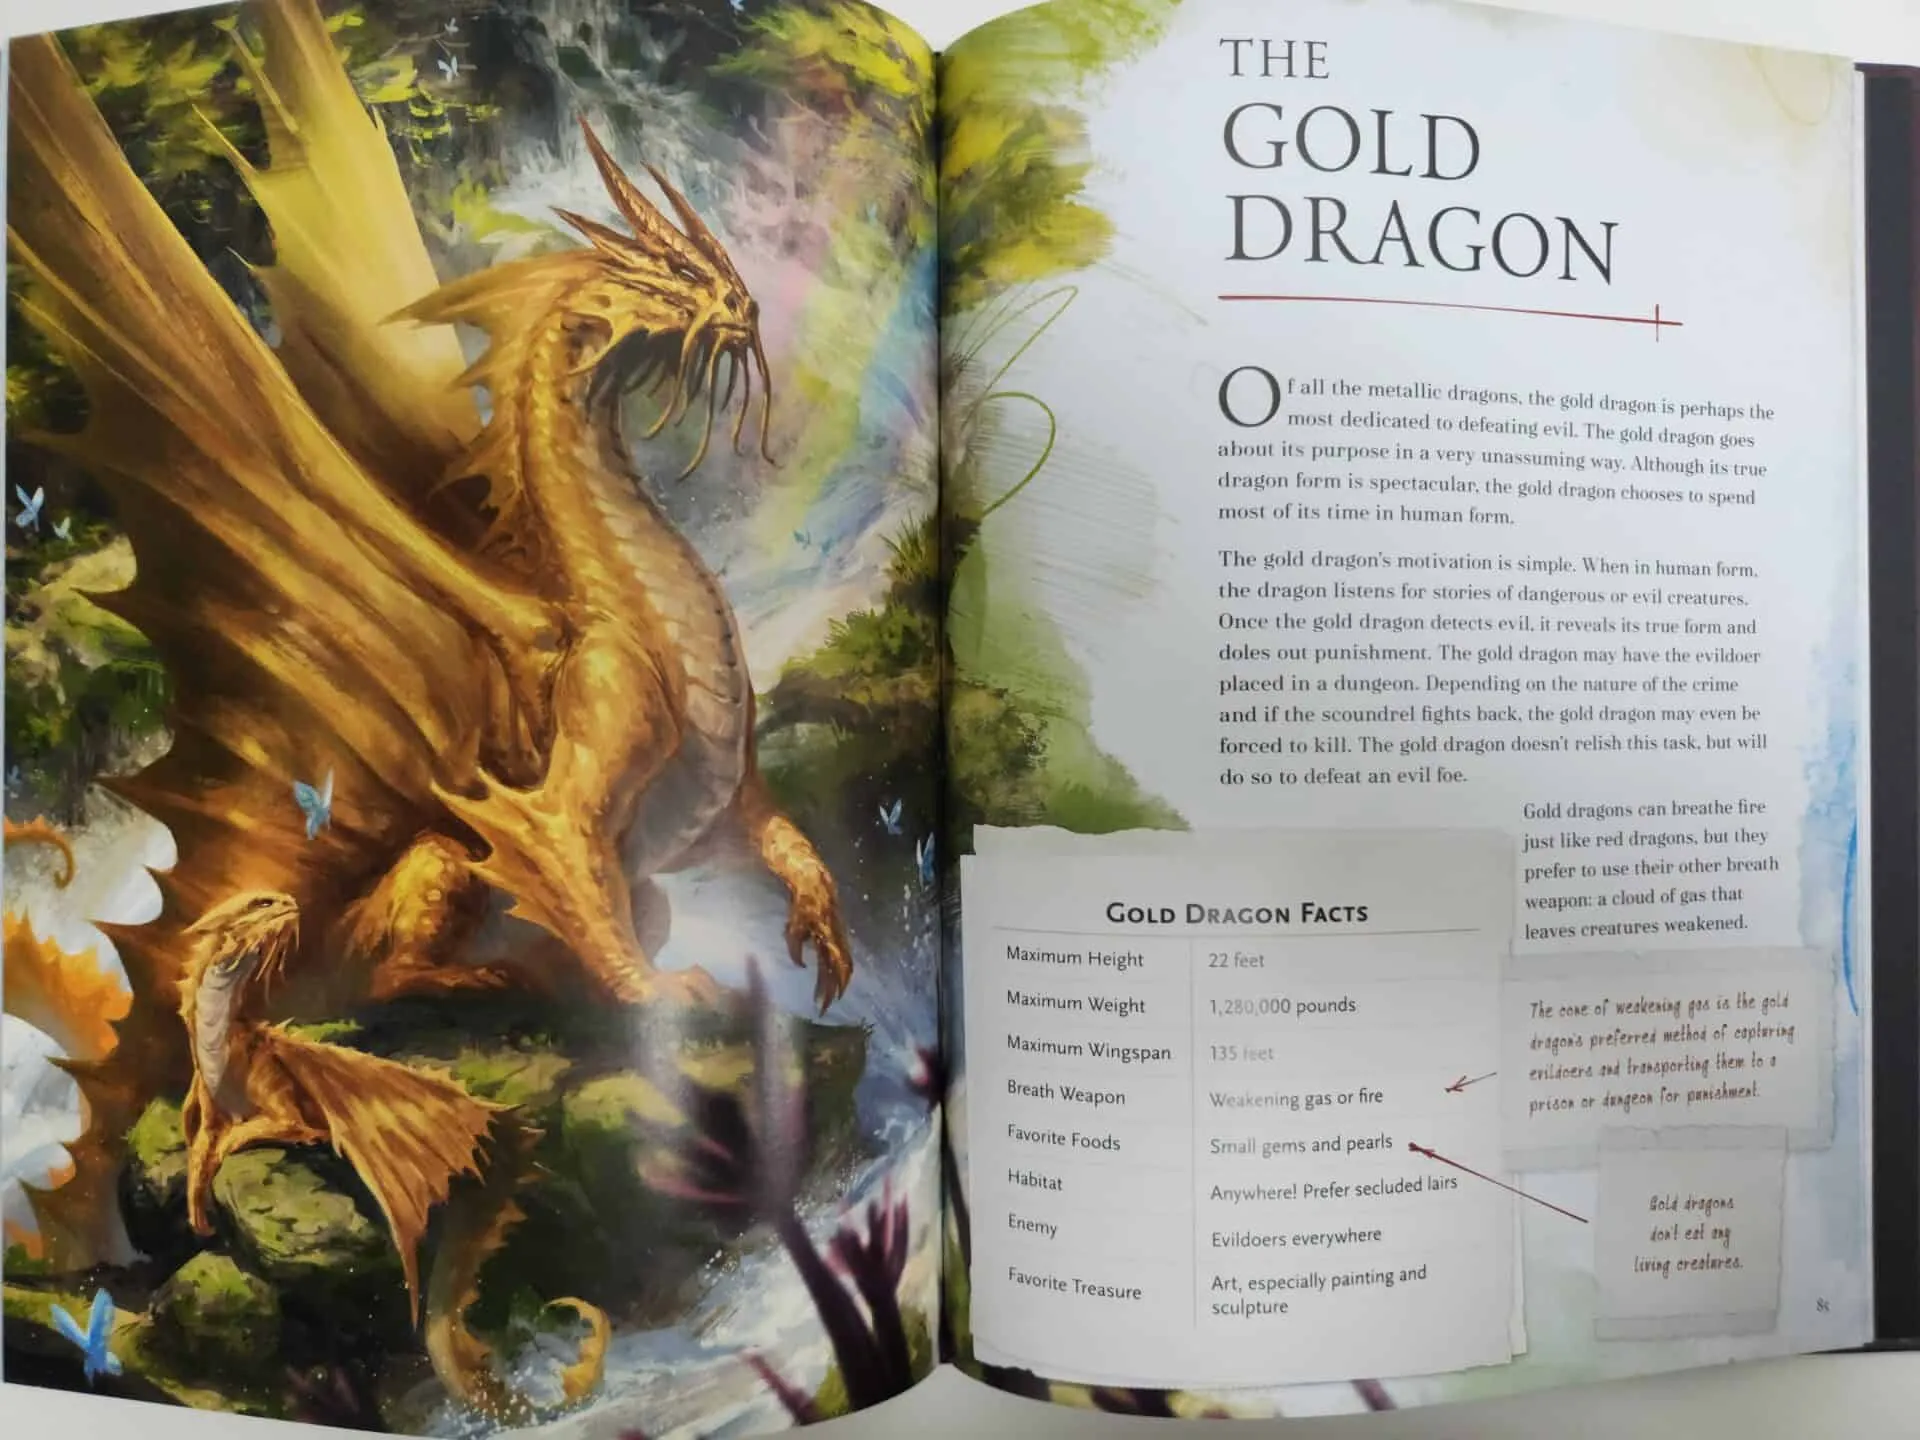 The Practically Complete Guide To Dragons, D&D Book